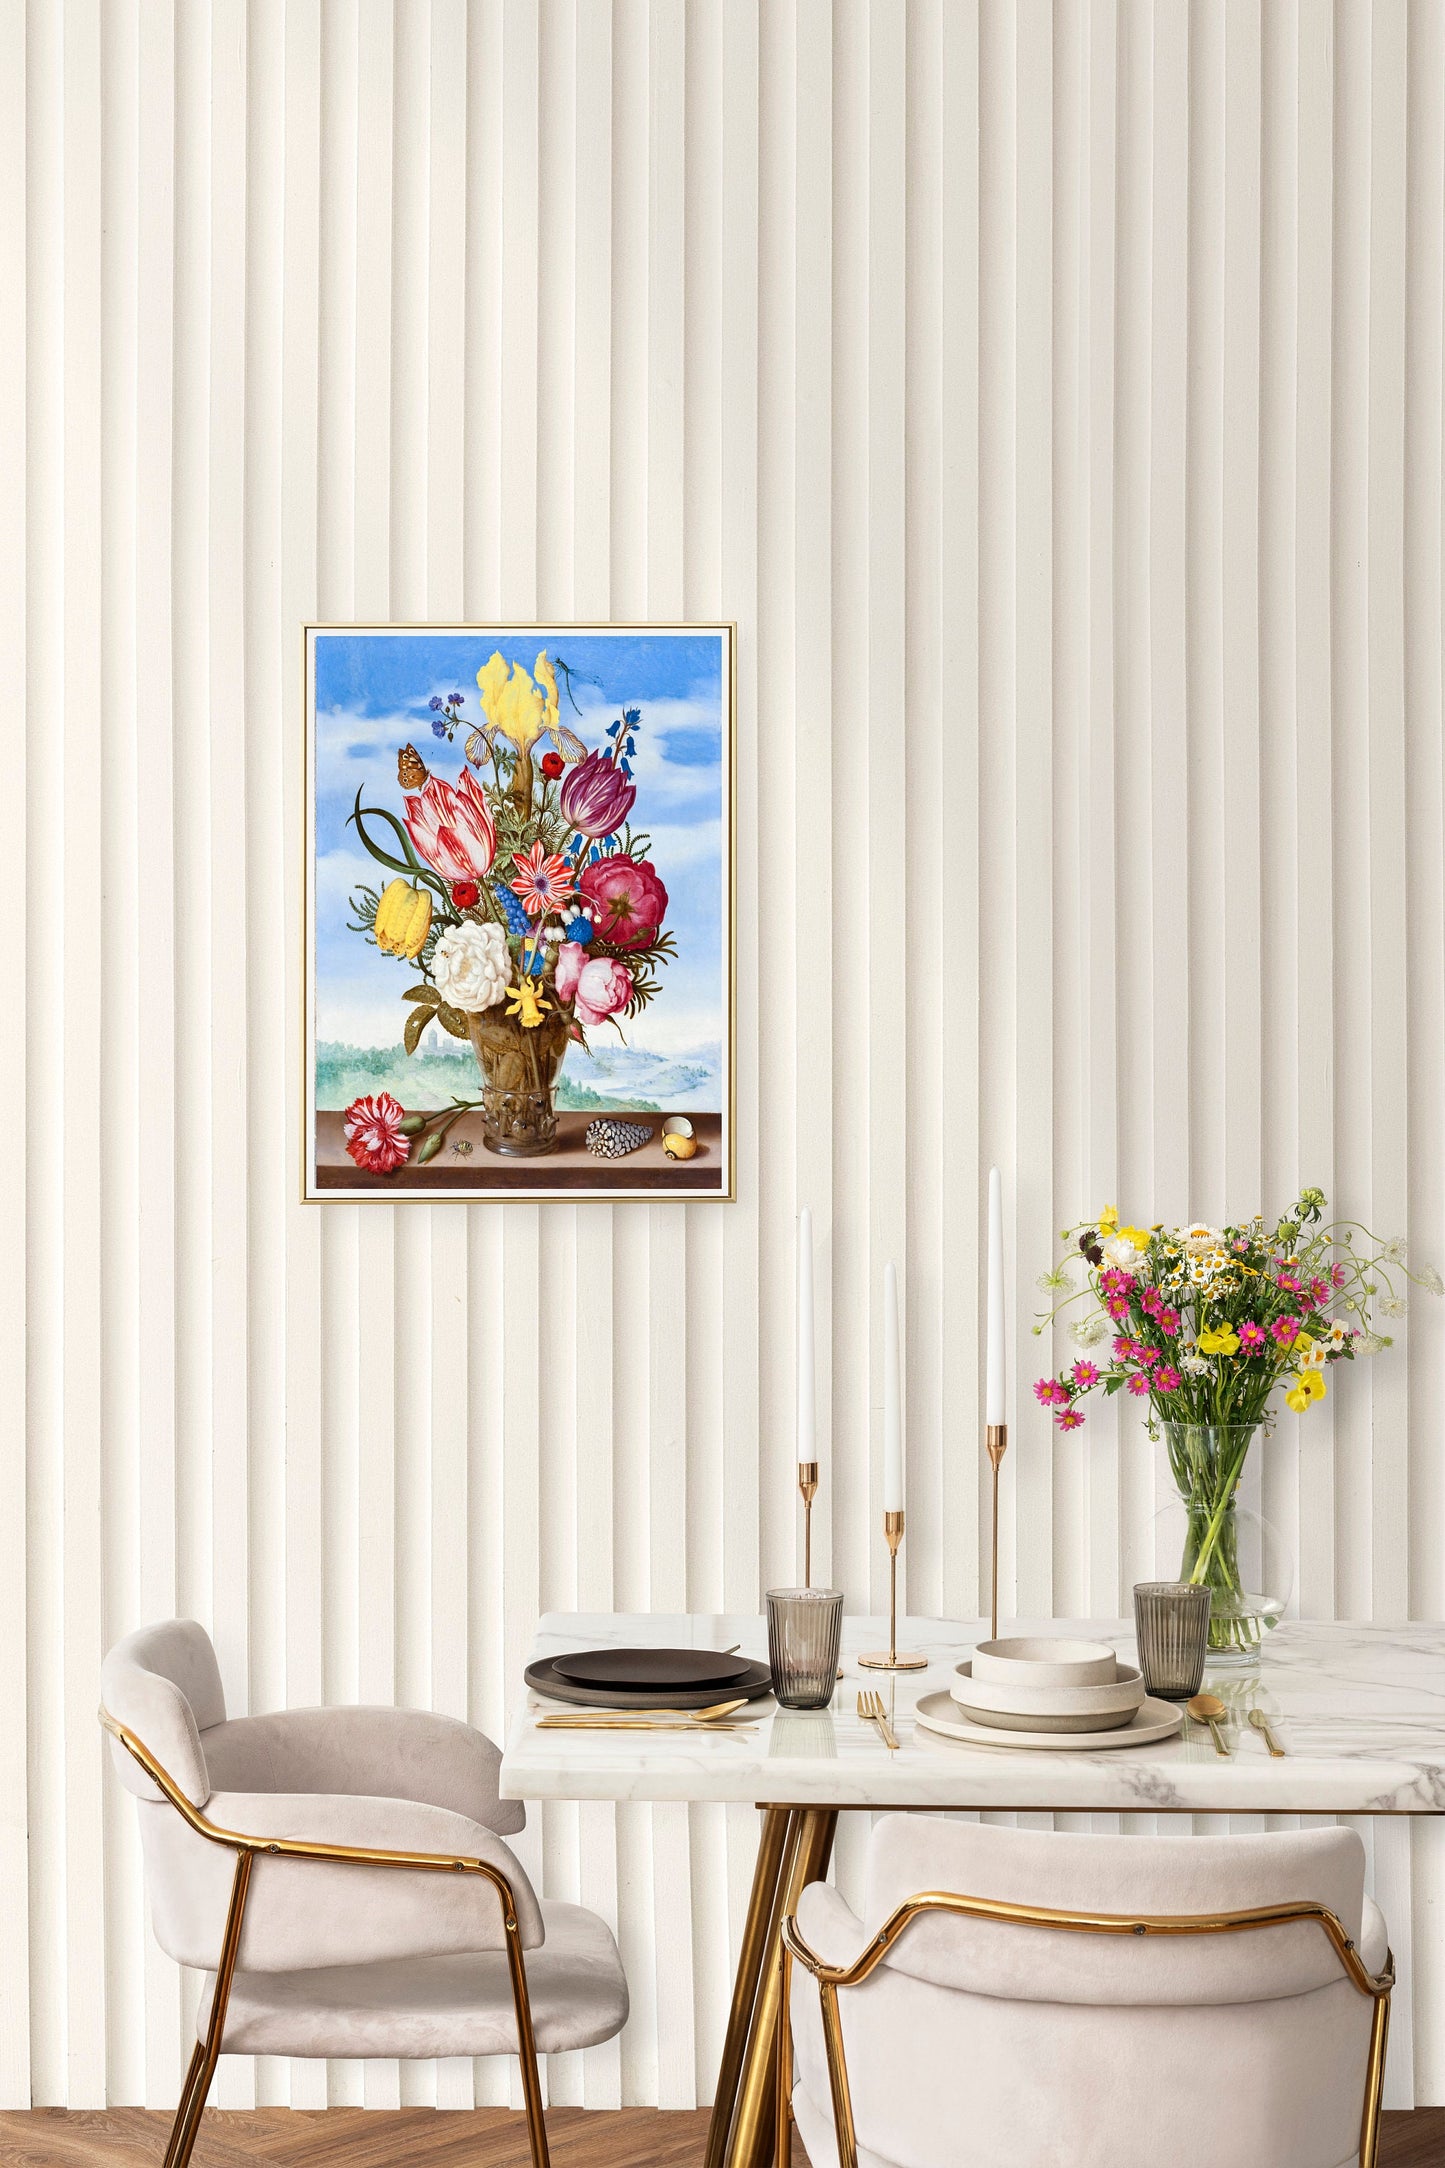 Bouquet of Flowers Poster Print Wall Hanging Decor